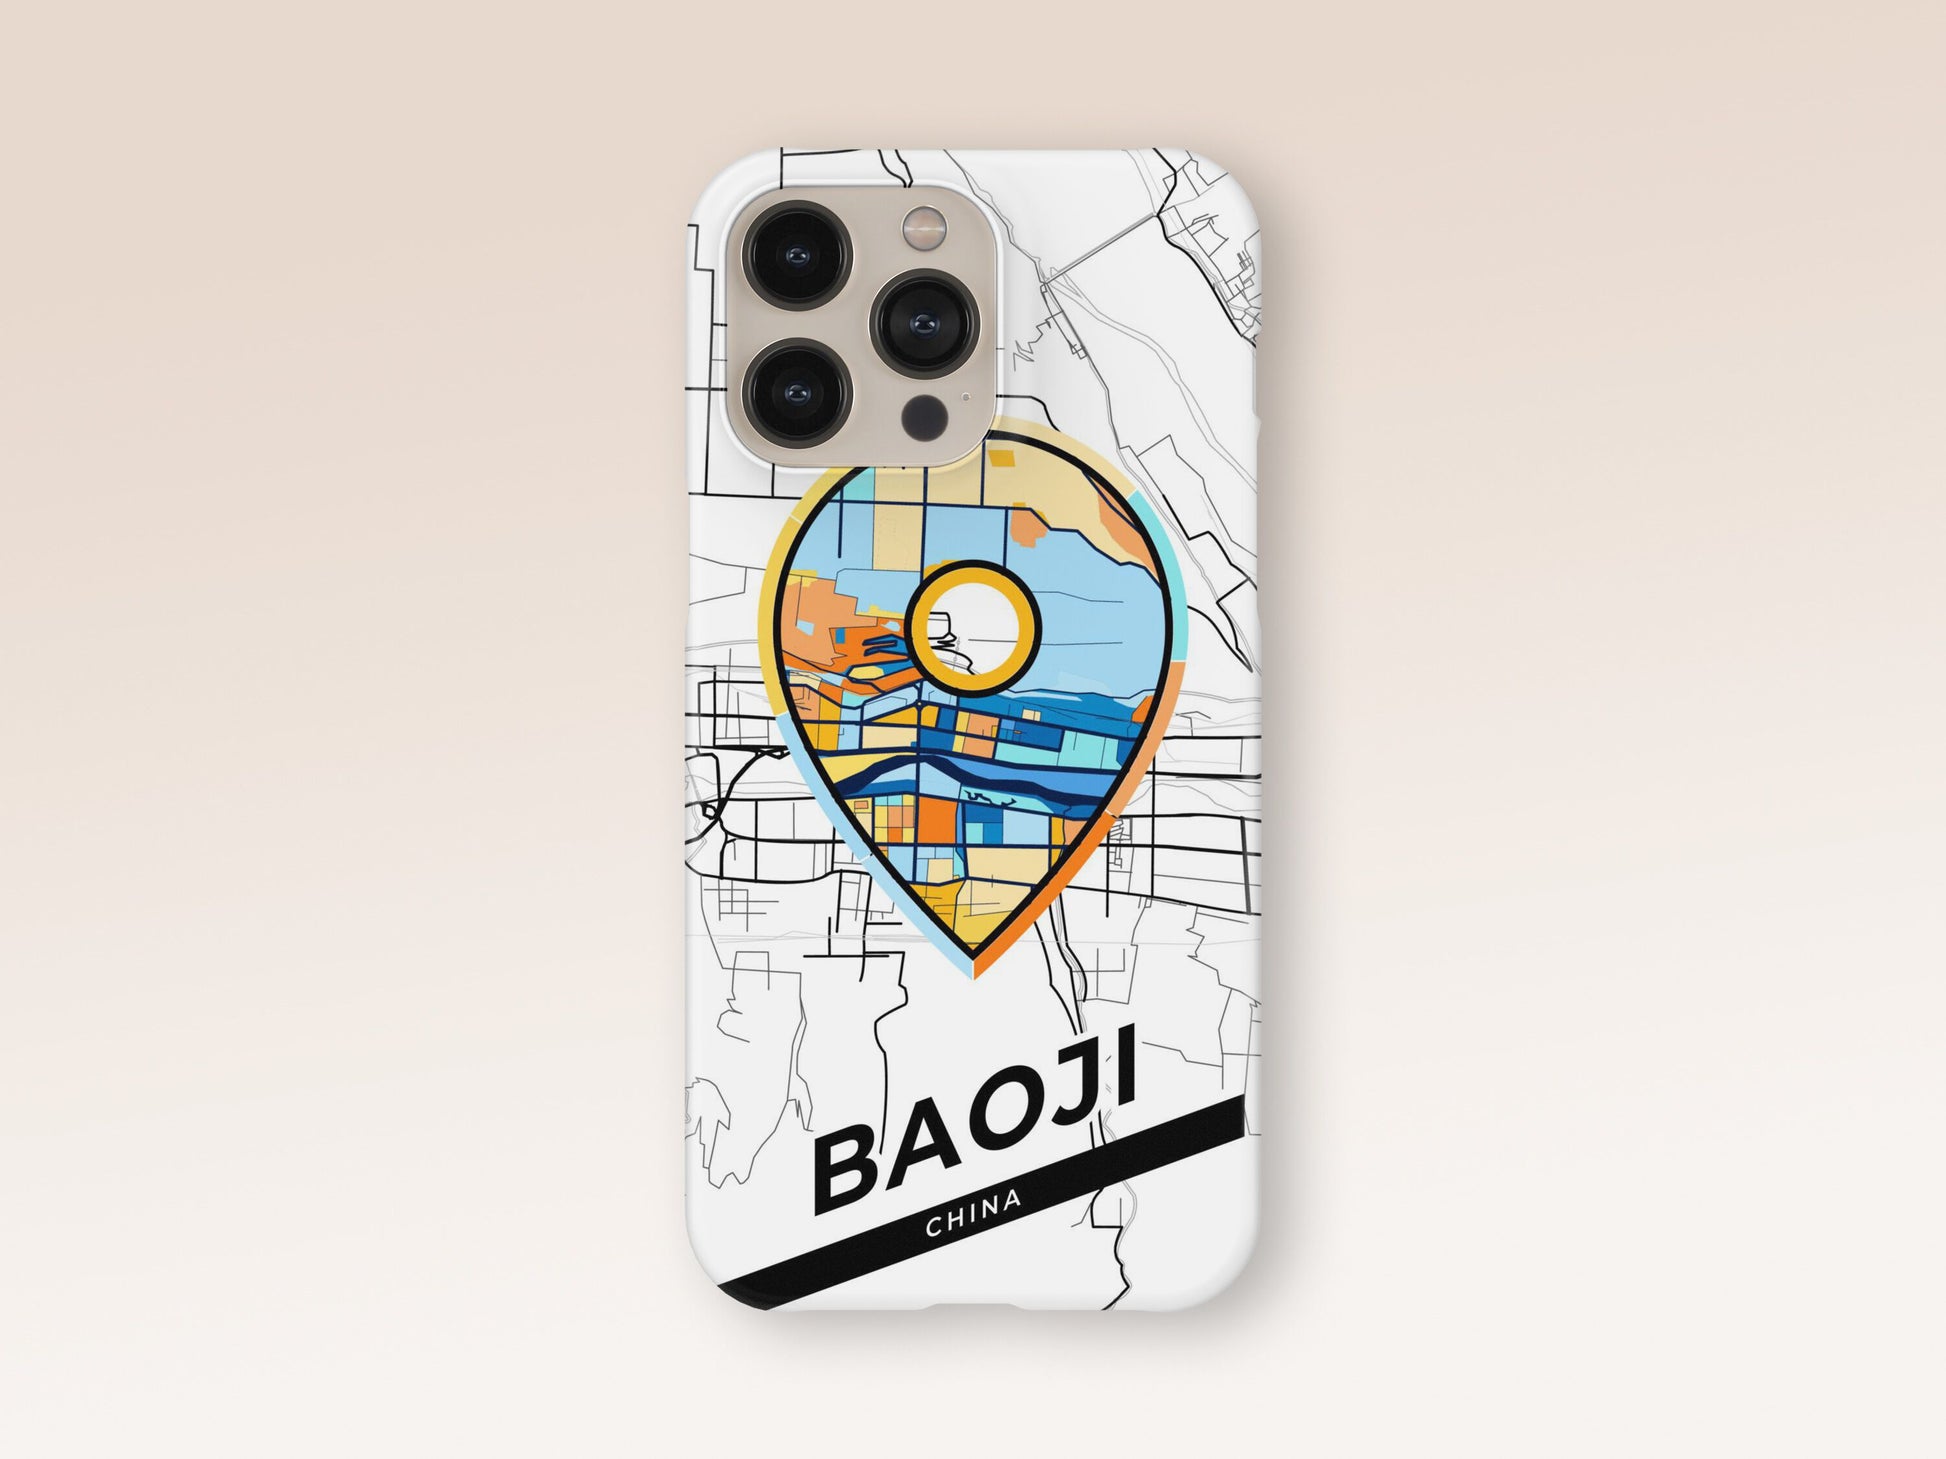 Baoji China slim phone case with colorful icon. Birthday, wedding or housewarming gift. Couple match cases. 1